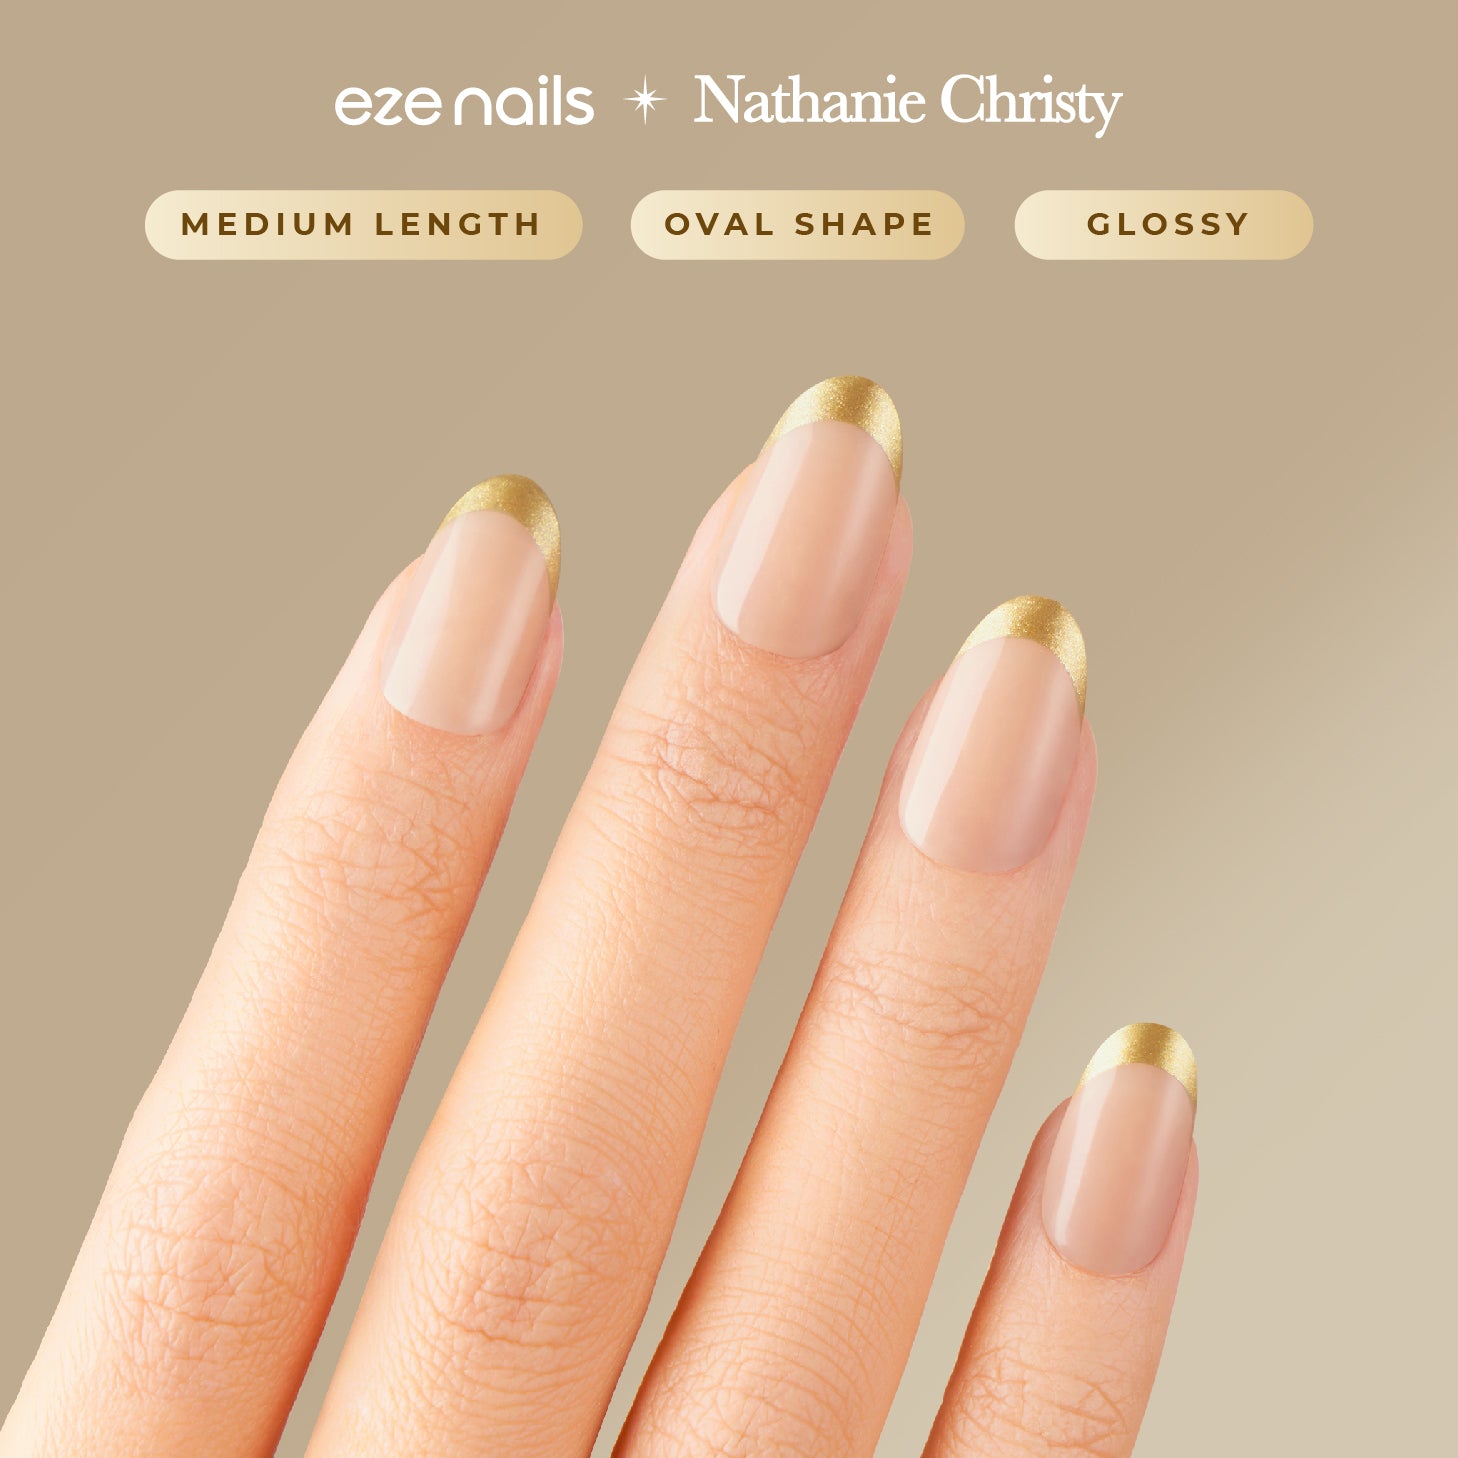 (NEW) Eze Nails x Nathanie Christy - Magnetic in Gold Spot on Manicure (Kuku Tempel Tangan)